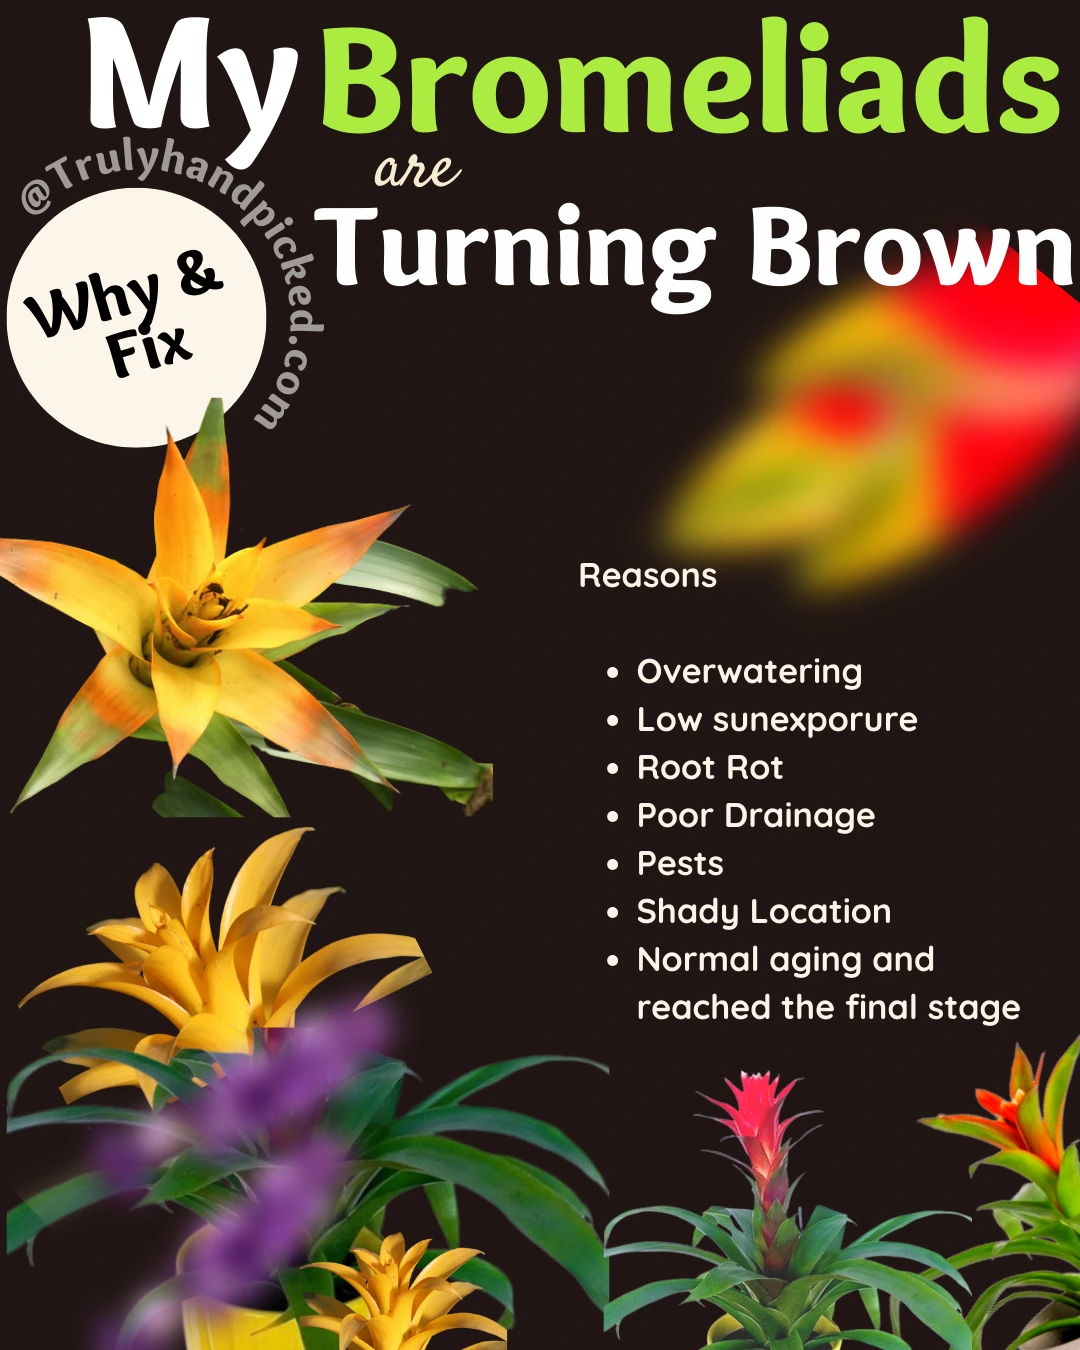 Reasons and fix why my bromeliads are turning brown